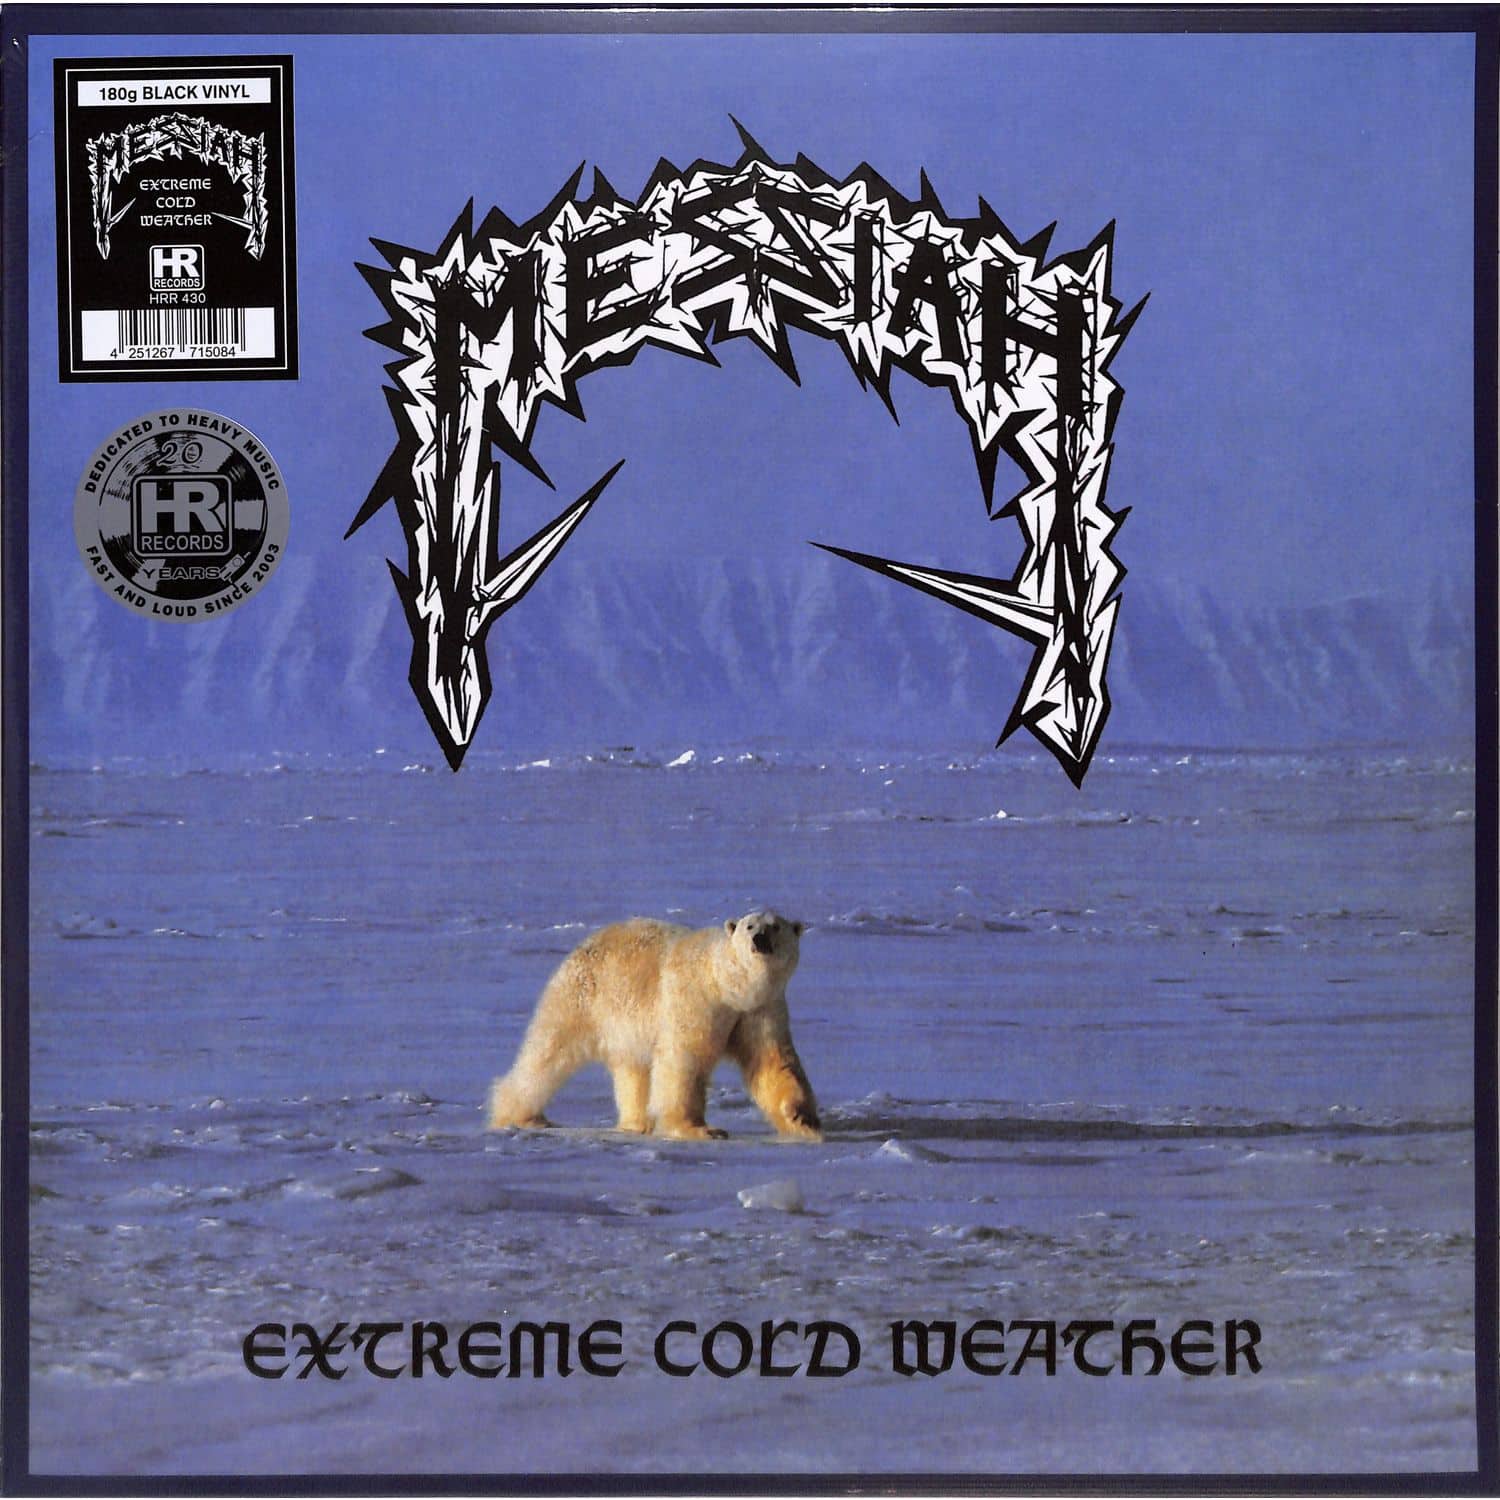 Messiah - EXTREME COLD WEATHER 